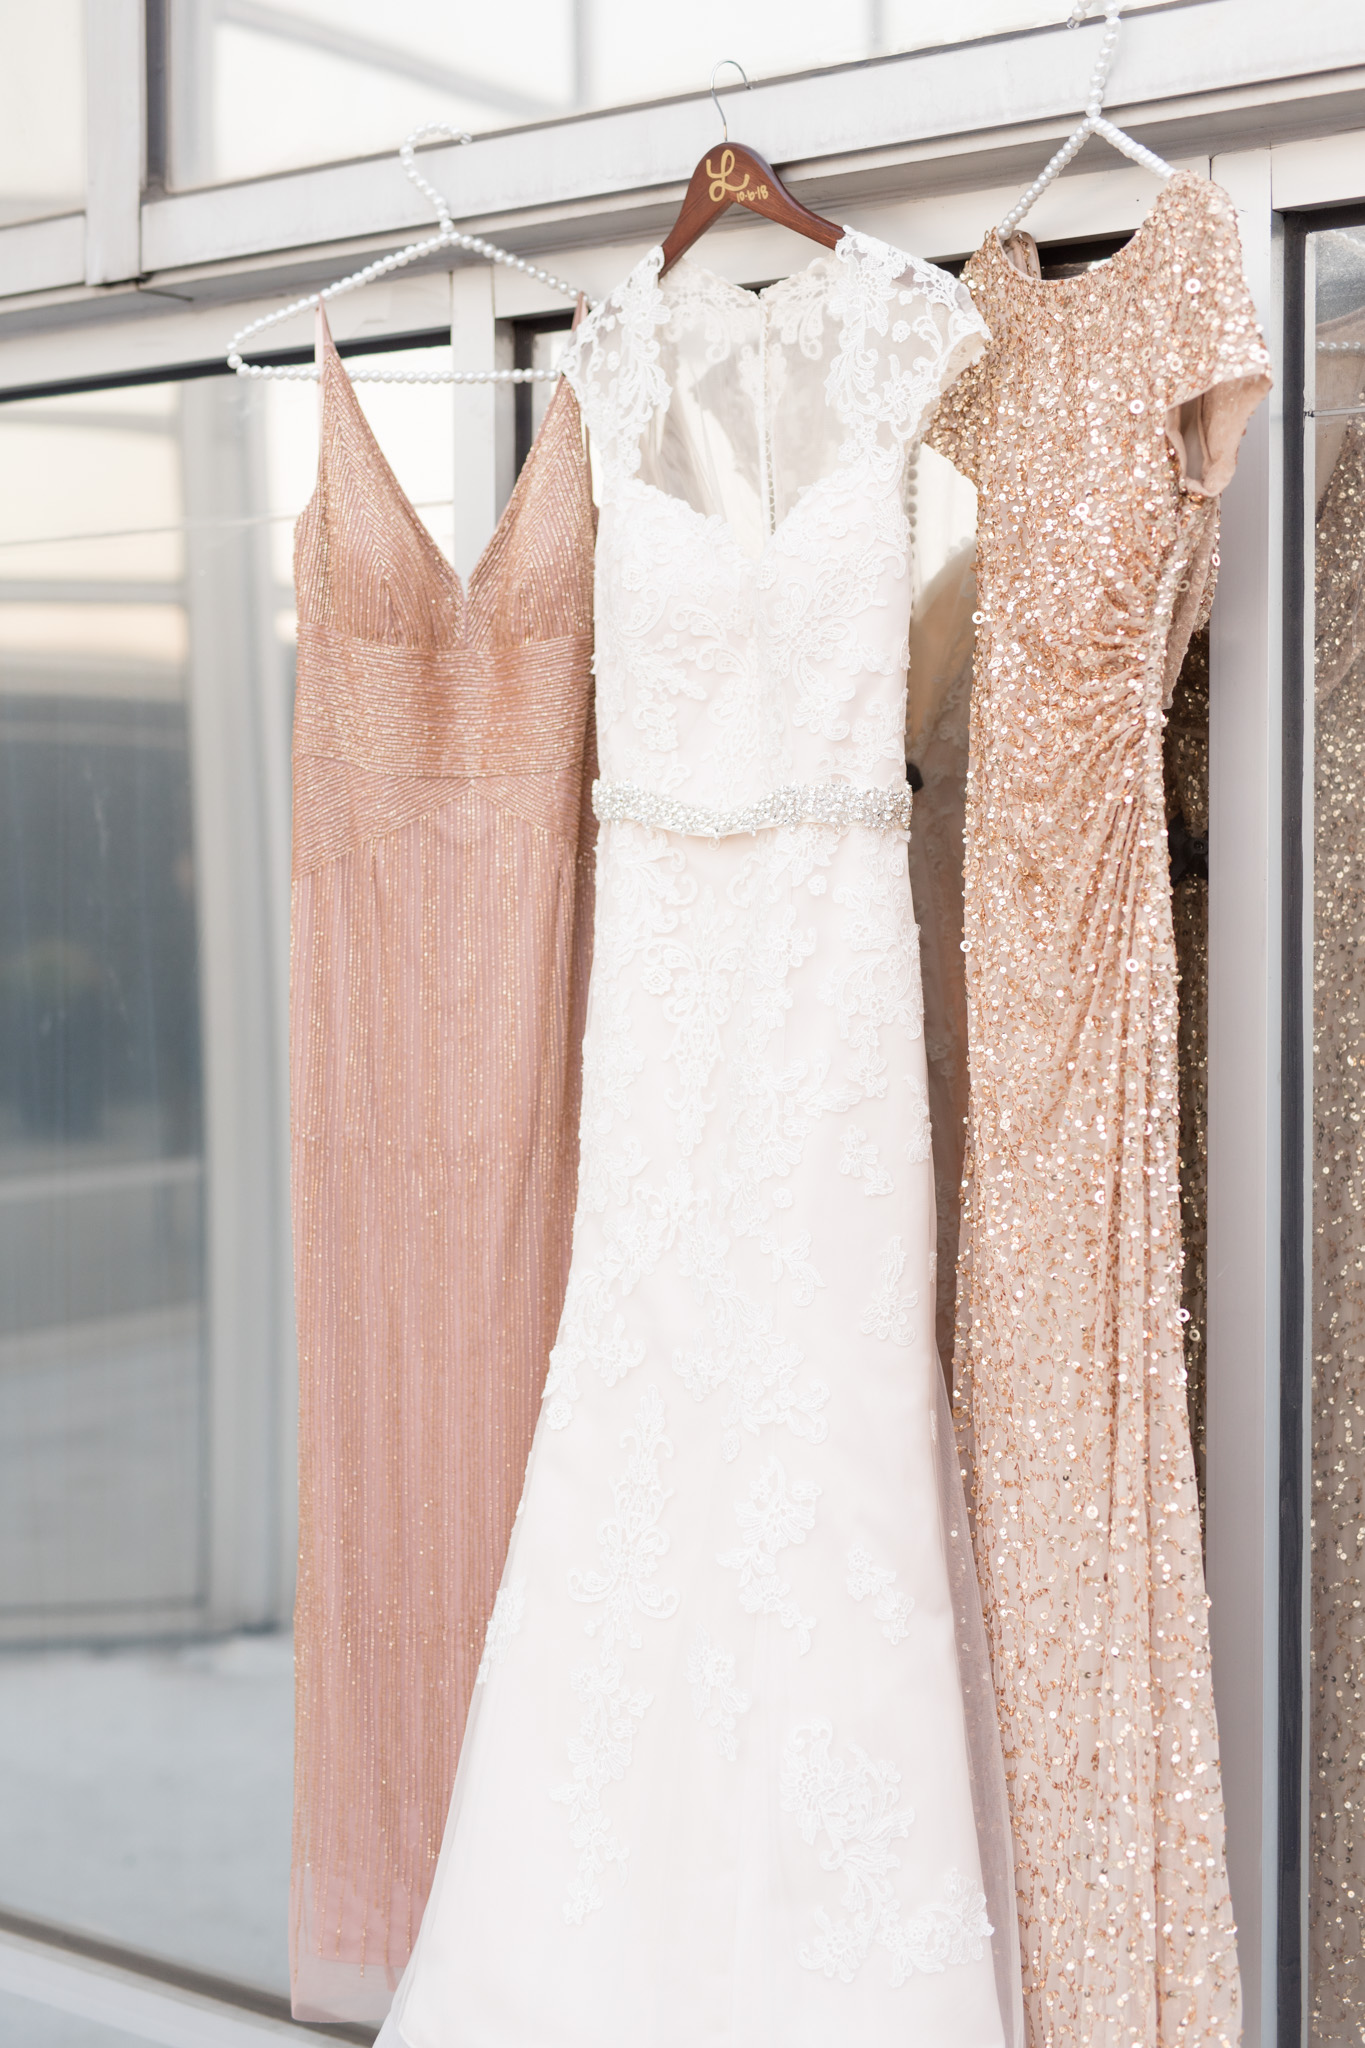 Bride and bridesmaids dresses hang on window.